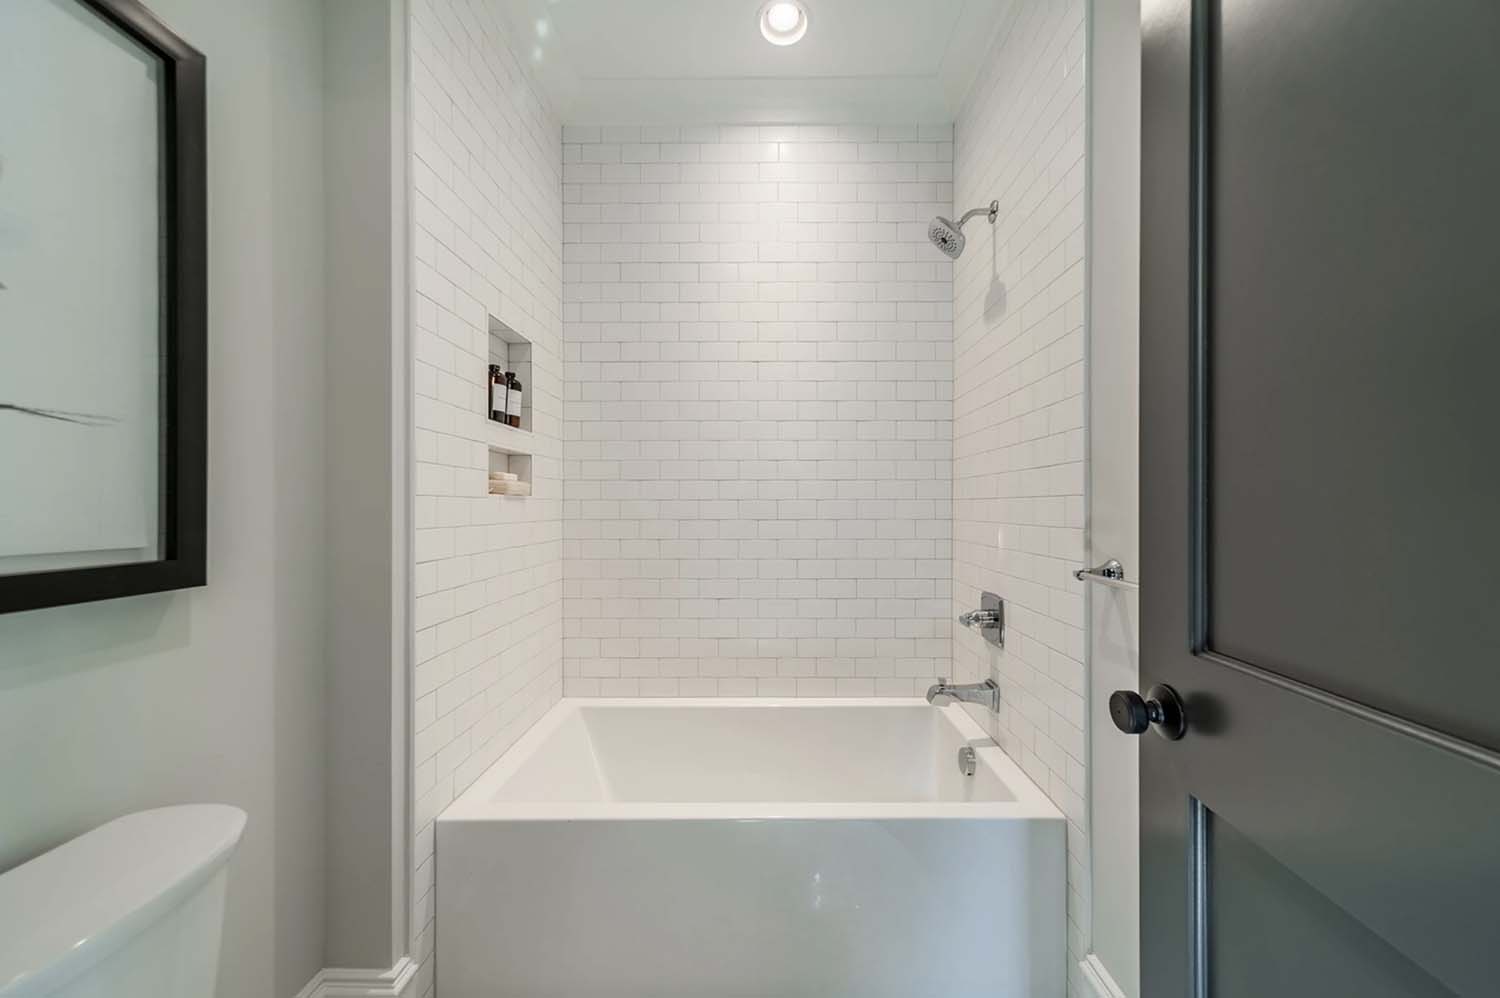 transitional style bathroom tub with white subway tile walls